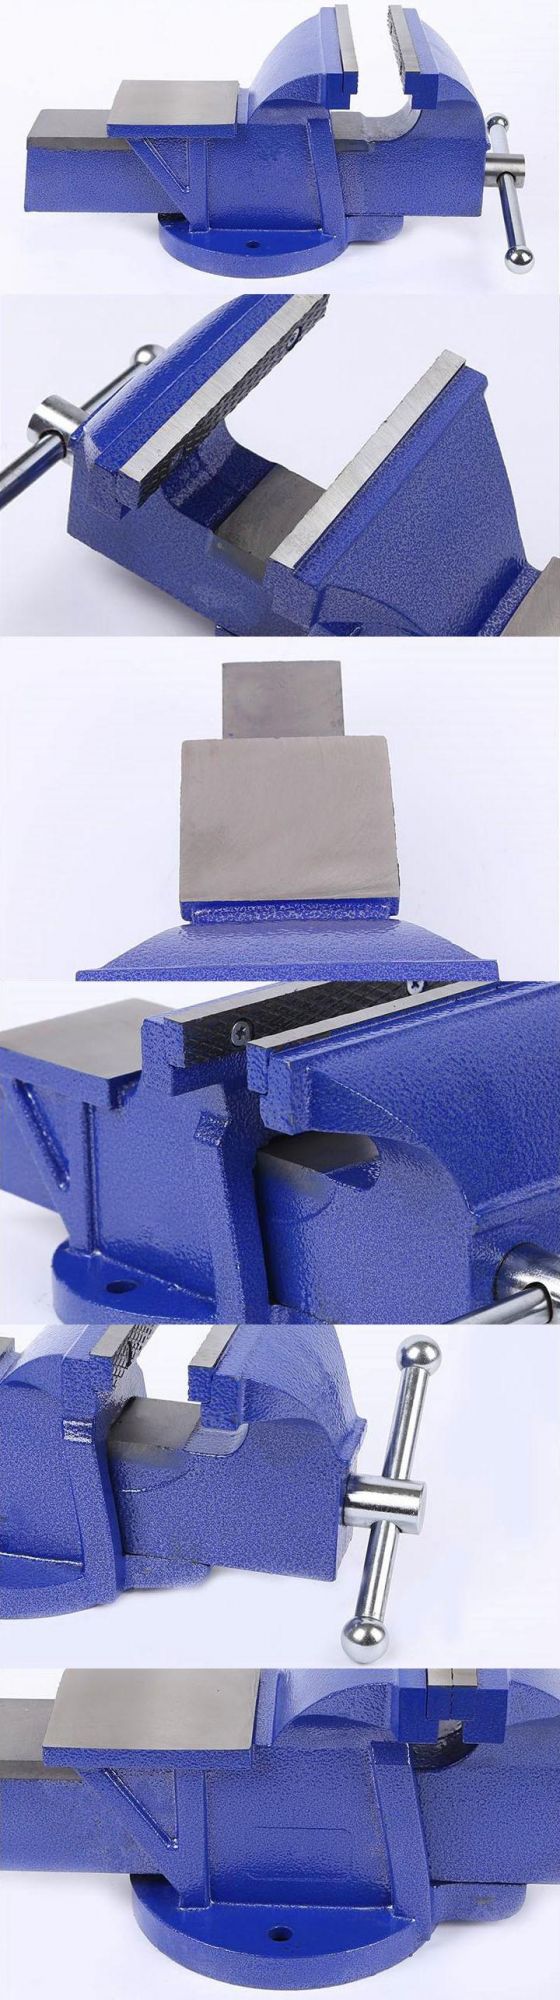 3 Inch Miniature Bench Vise with Blue Hammertone